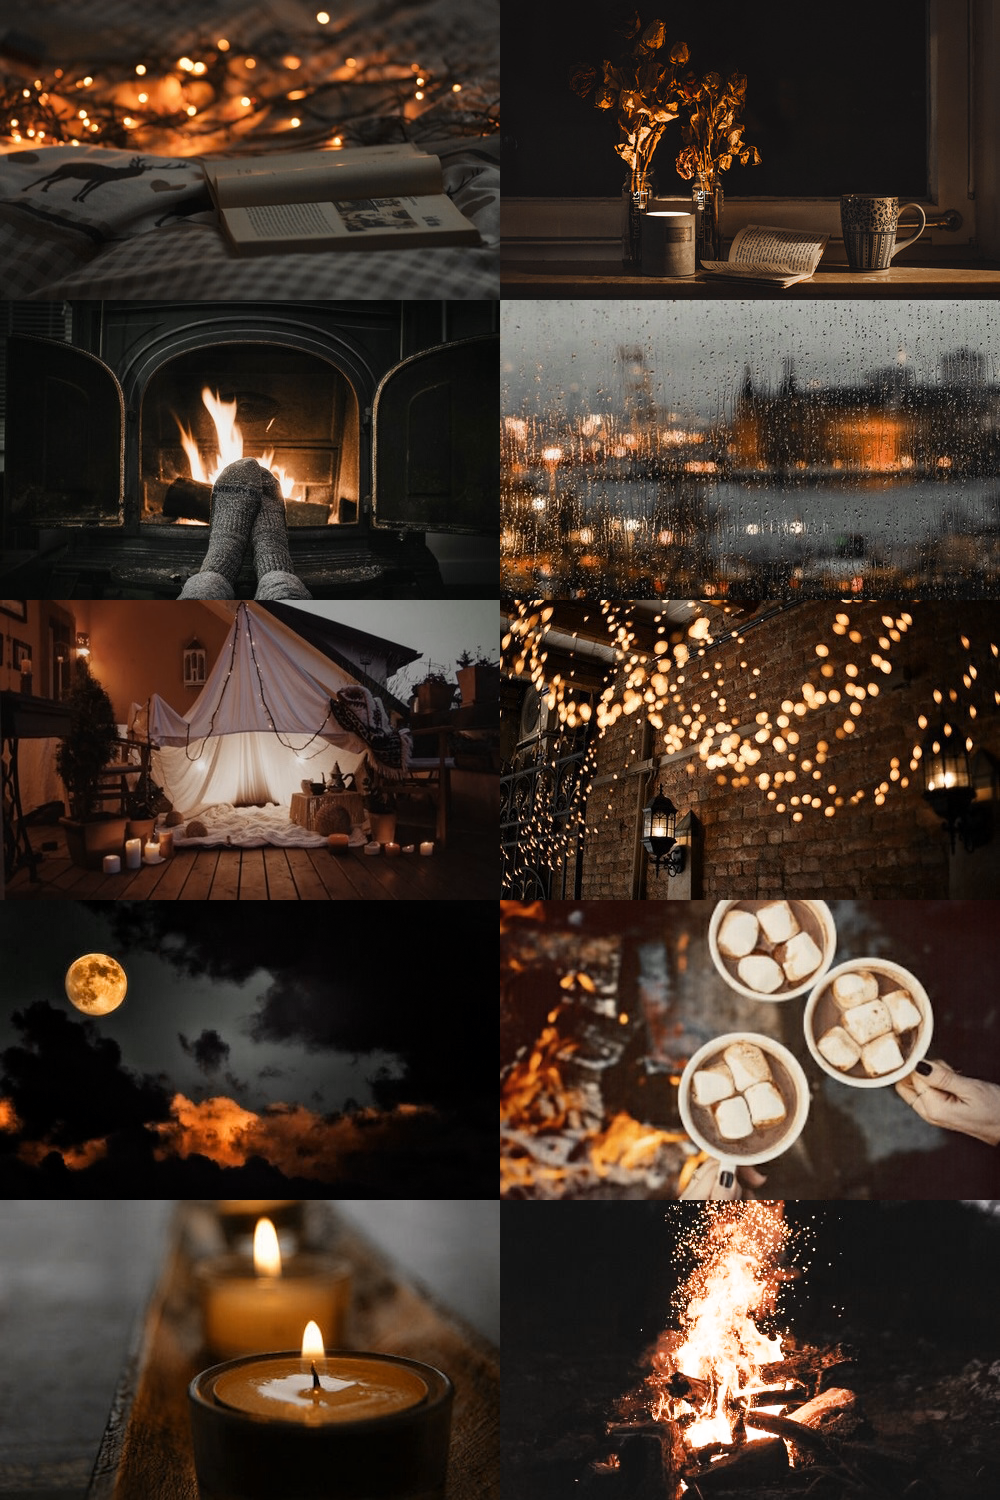 Best part of chilly days and cold nights ❤️. Autumn aesthetic, Autumn inspiration, Autumn cozy